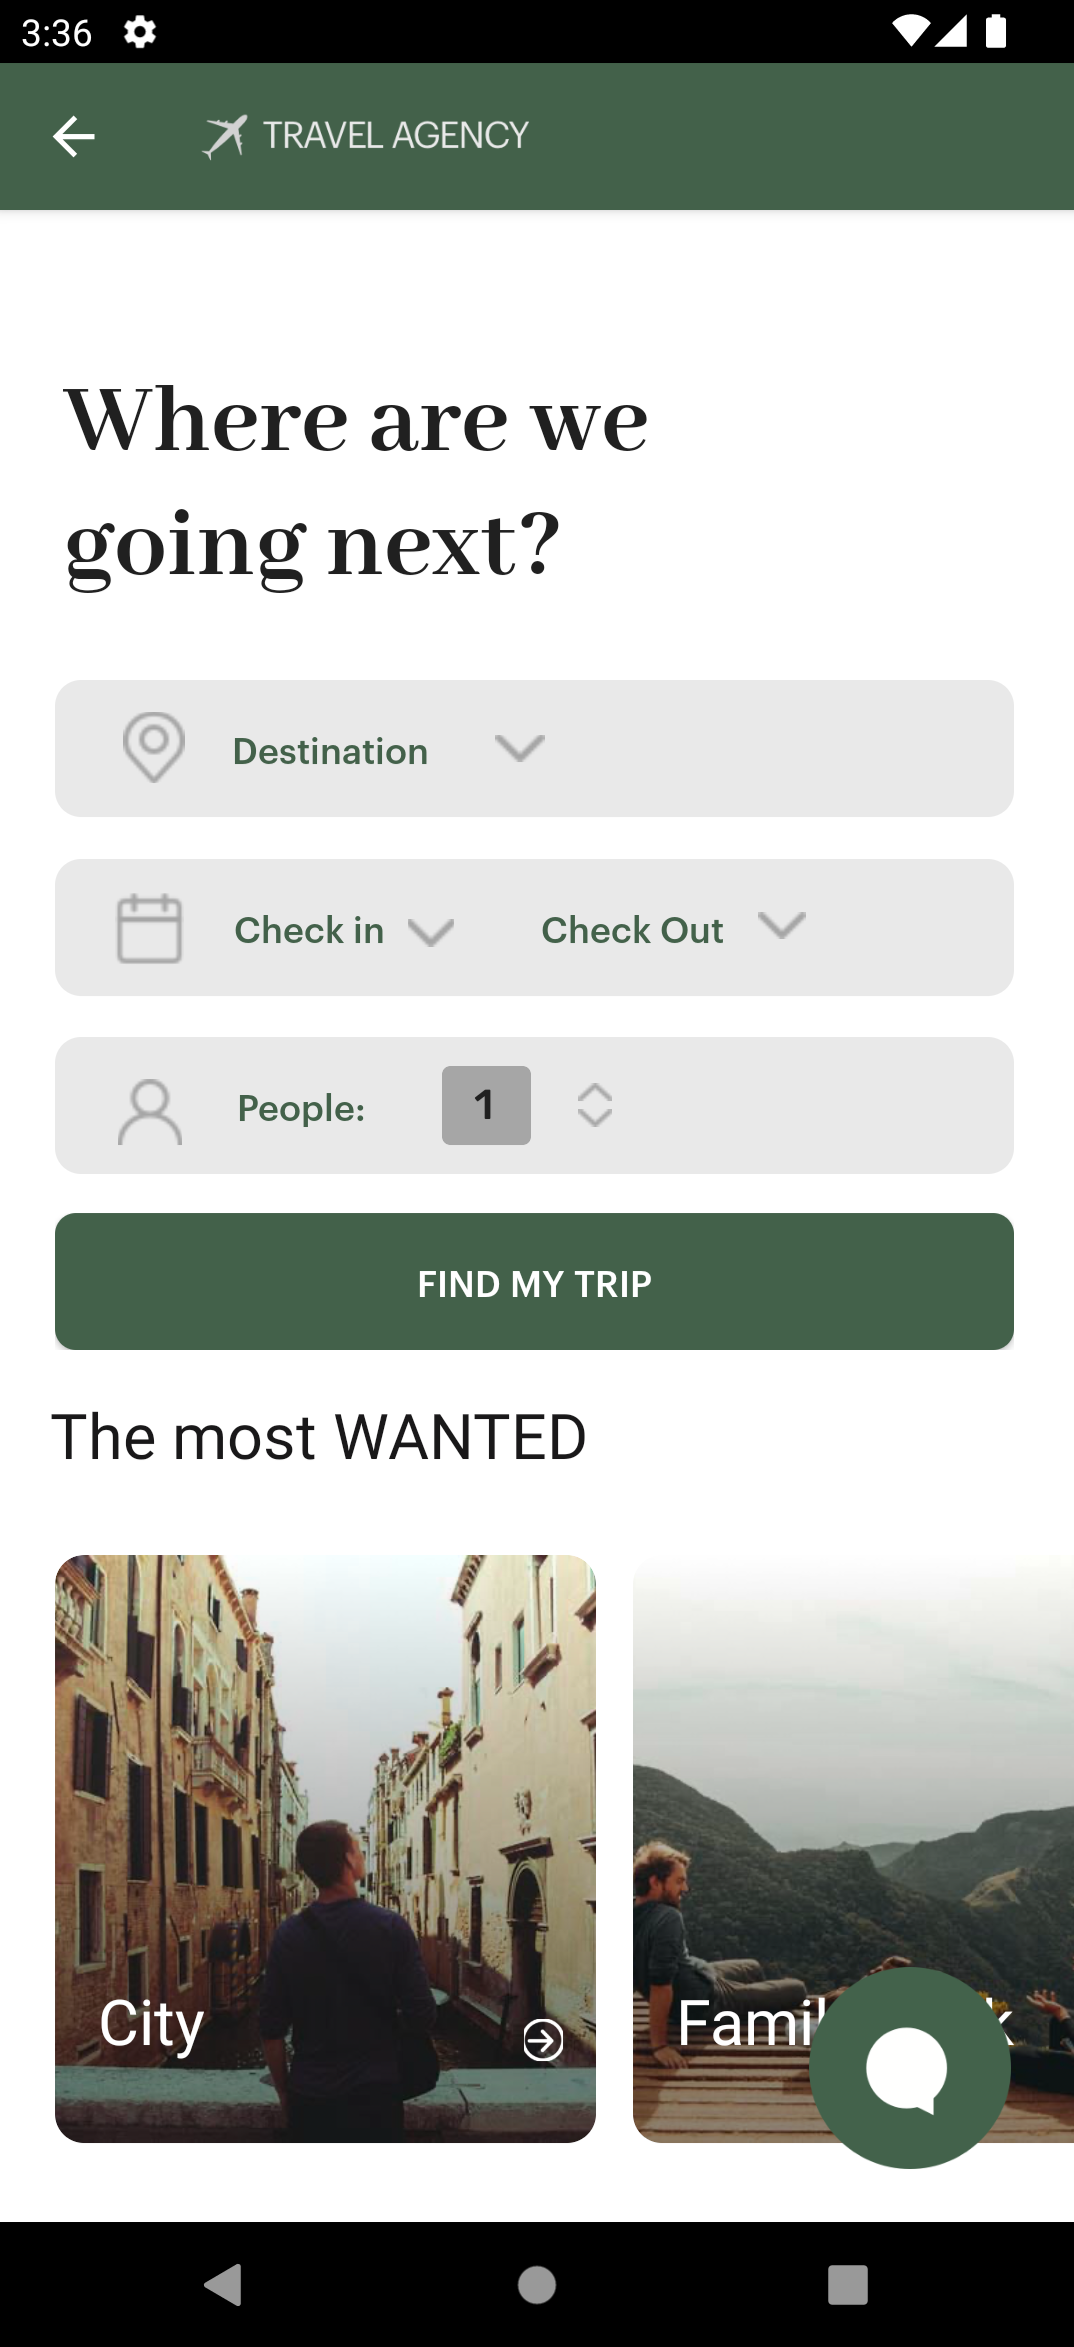 TravelAgency-MultiExperience-AndroidPhone-Trips_png